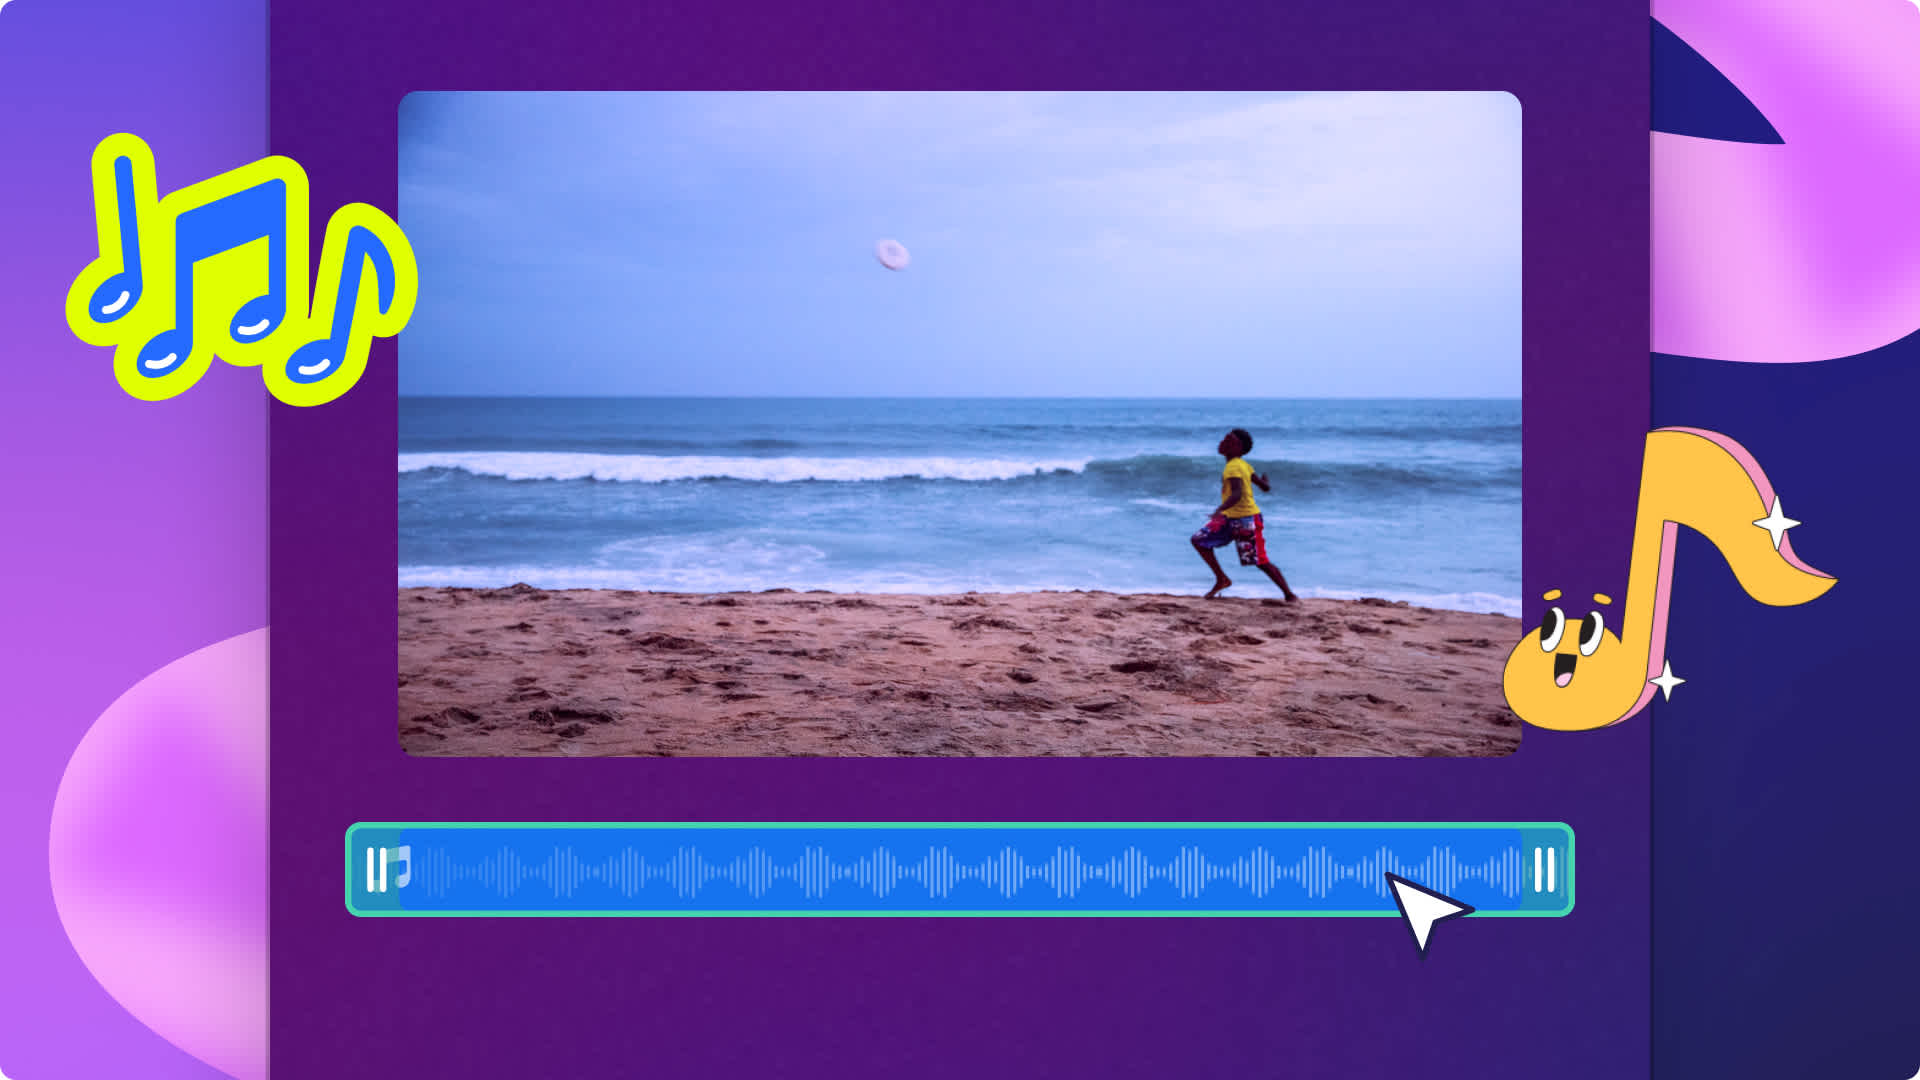 An abstract image of adding a music clip to a video of a child running on the beach